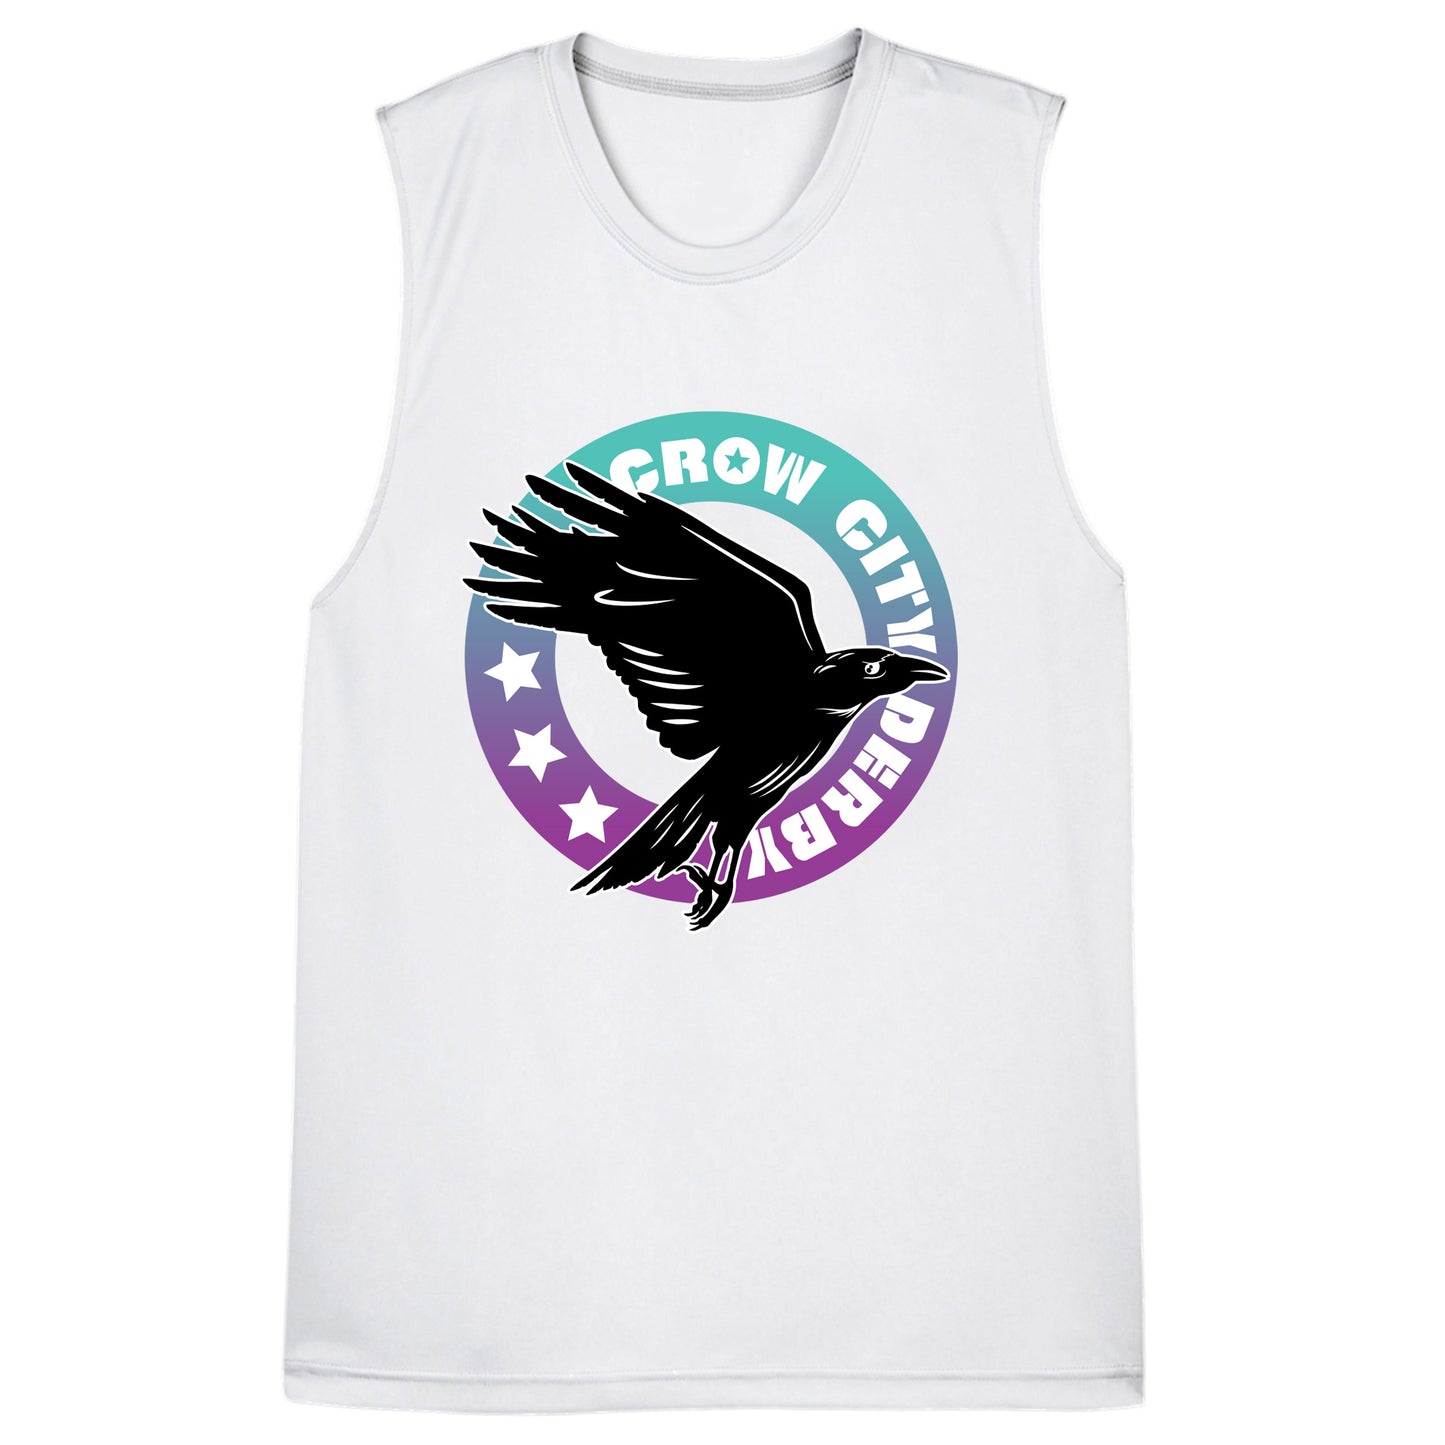 Crow City Mens Performance Muscle Tank